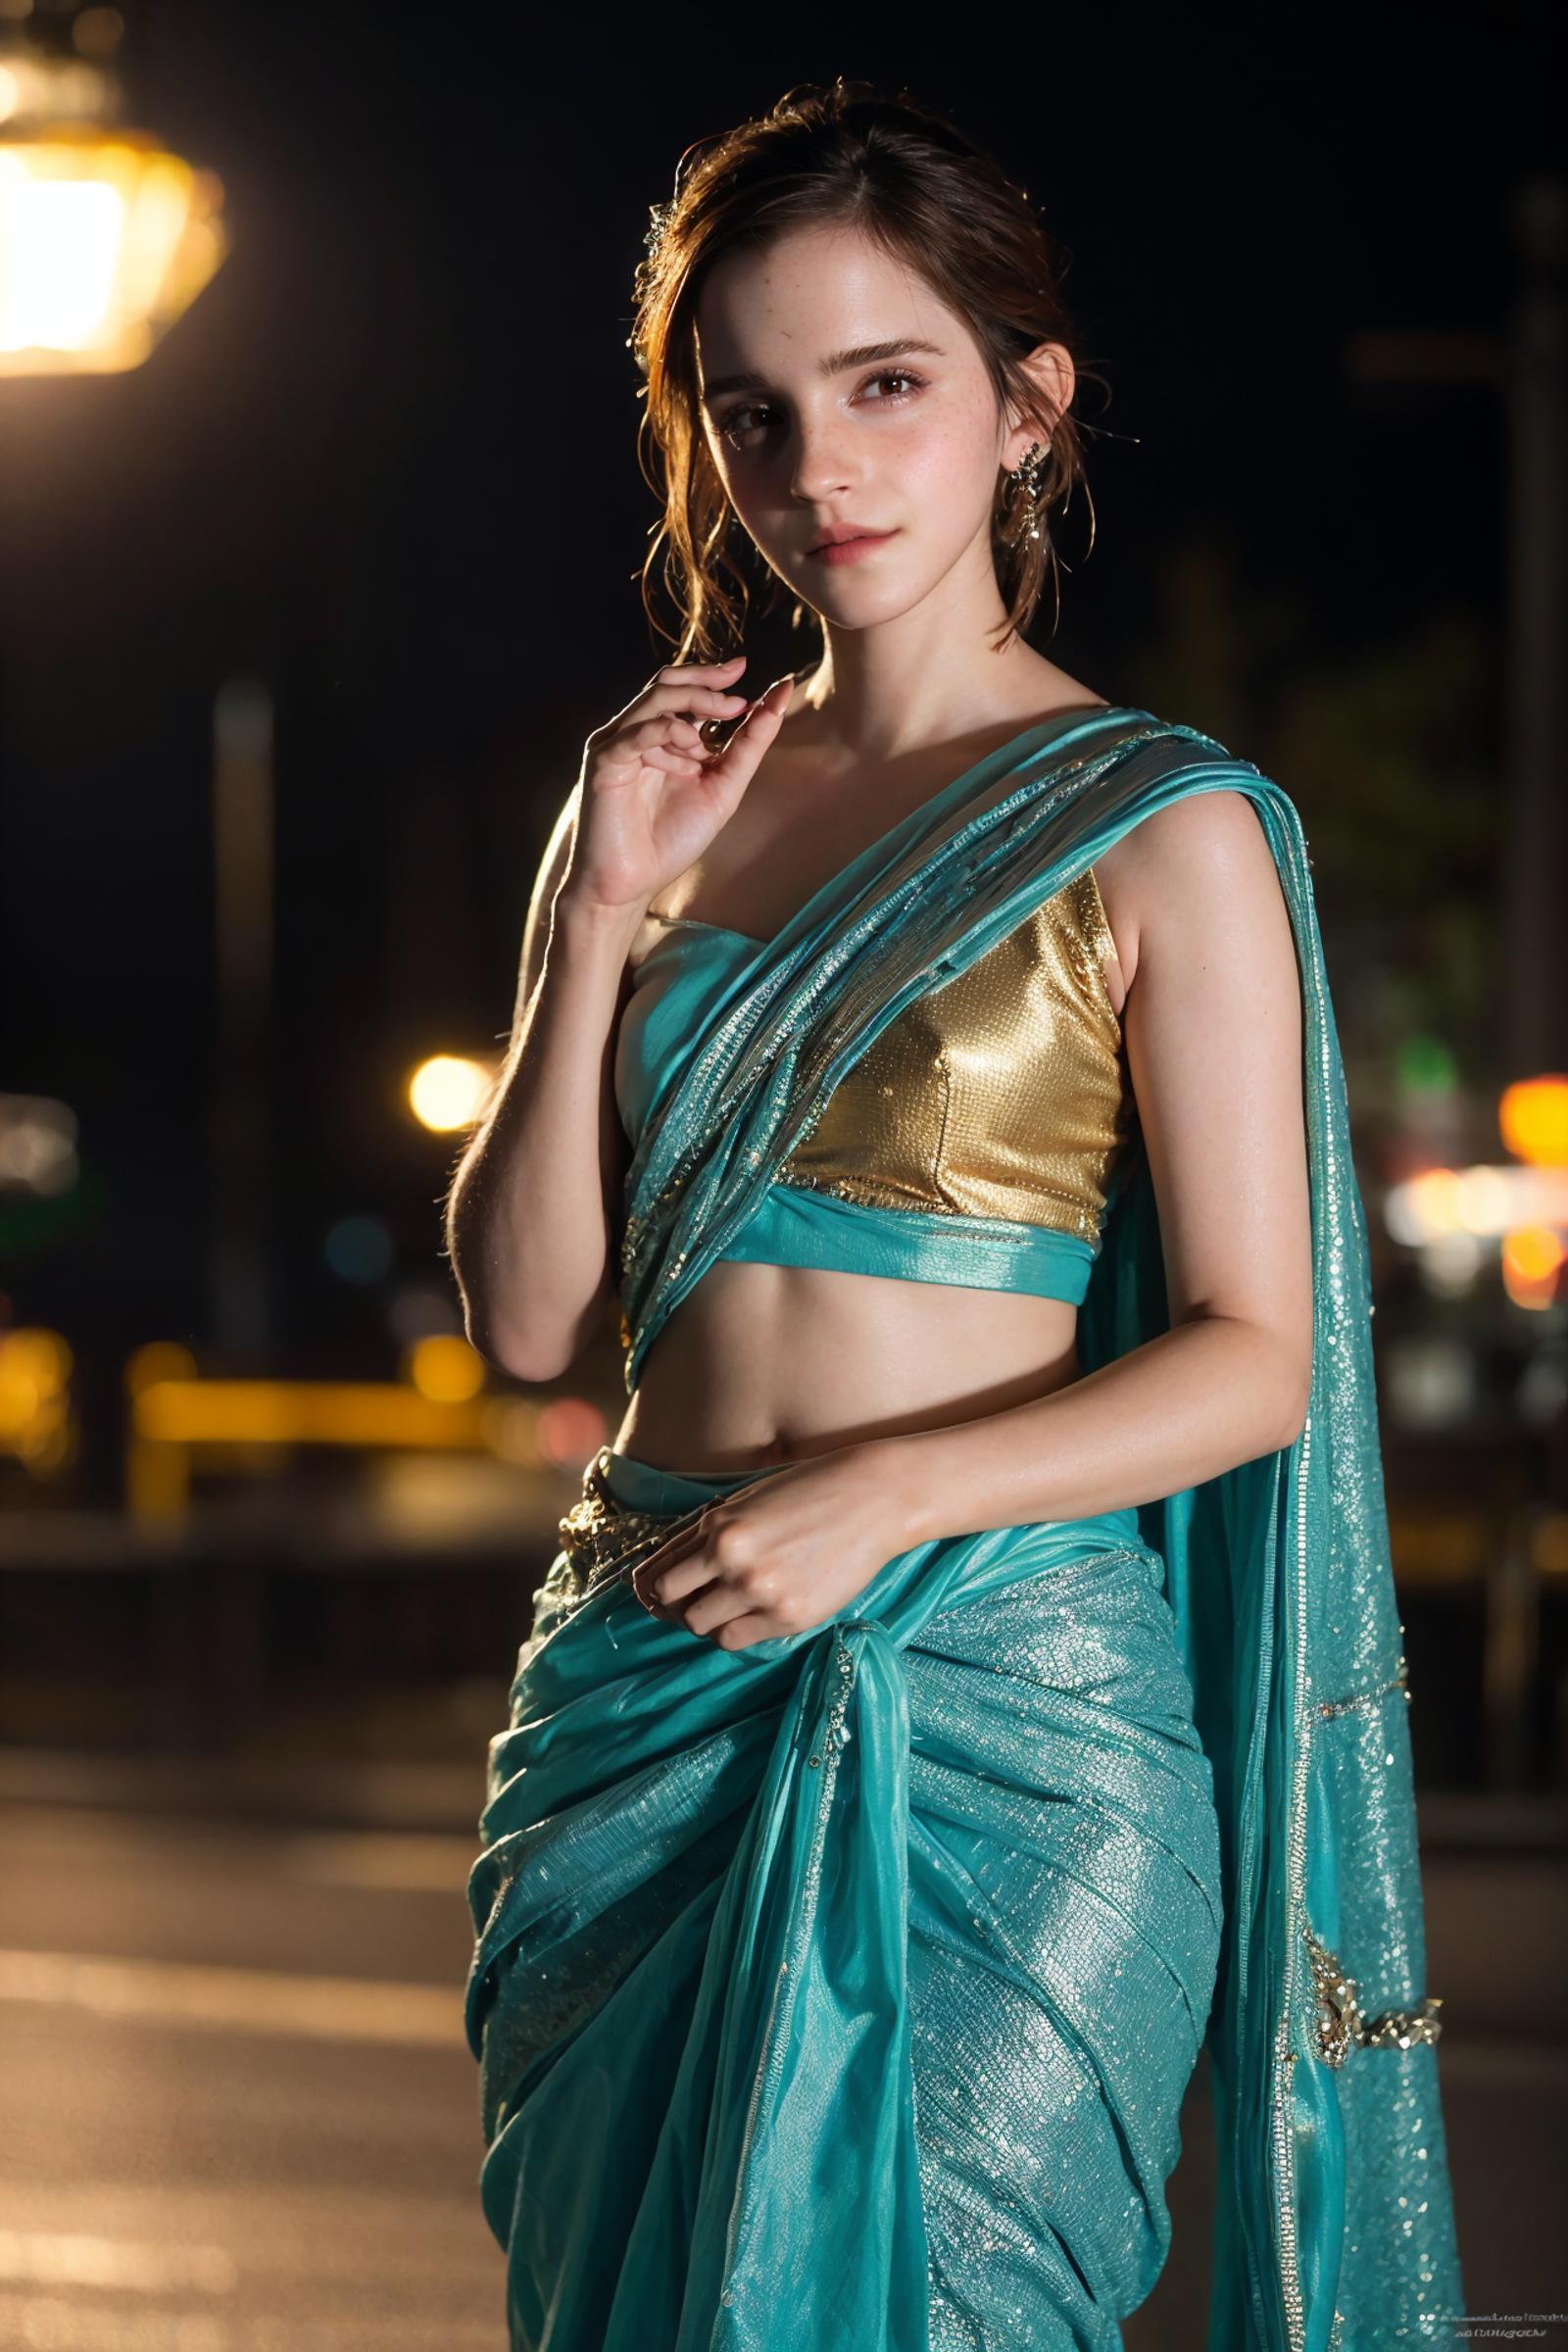 Indian Style Sarees image by mrghostrider